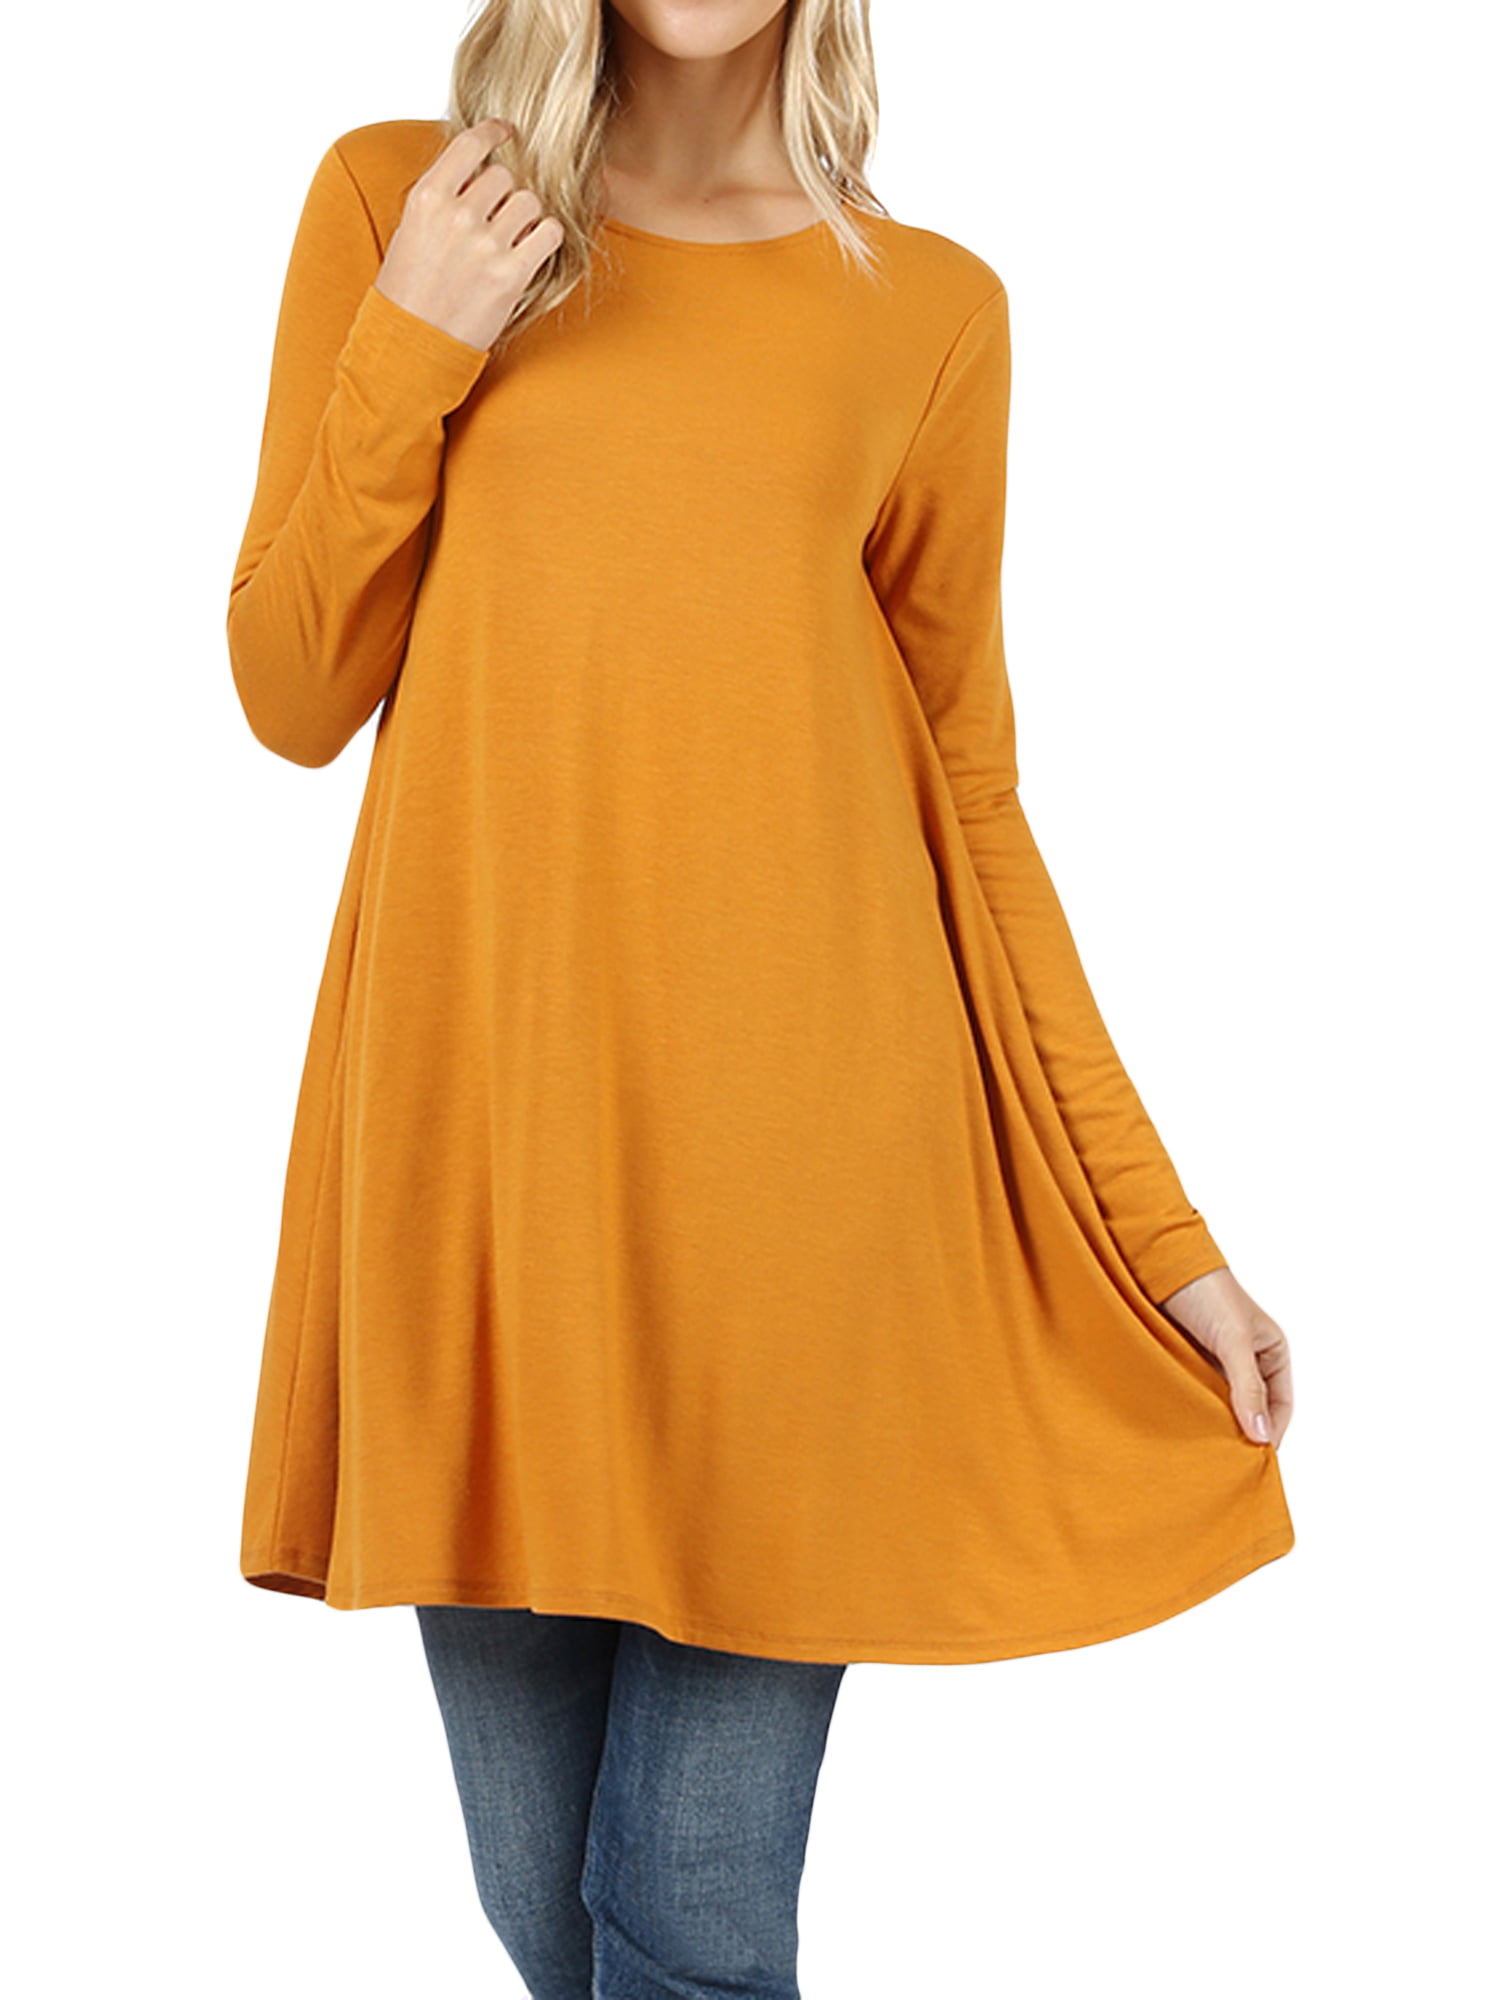 TheLovely - Women Round Neck Long or 3/4 Sleeve Flattering Comfy Swing ...